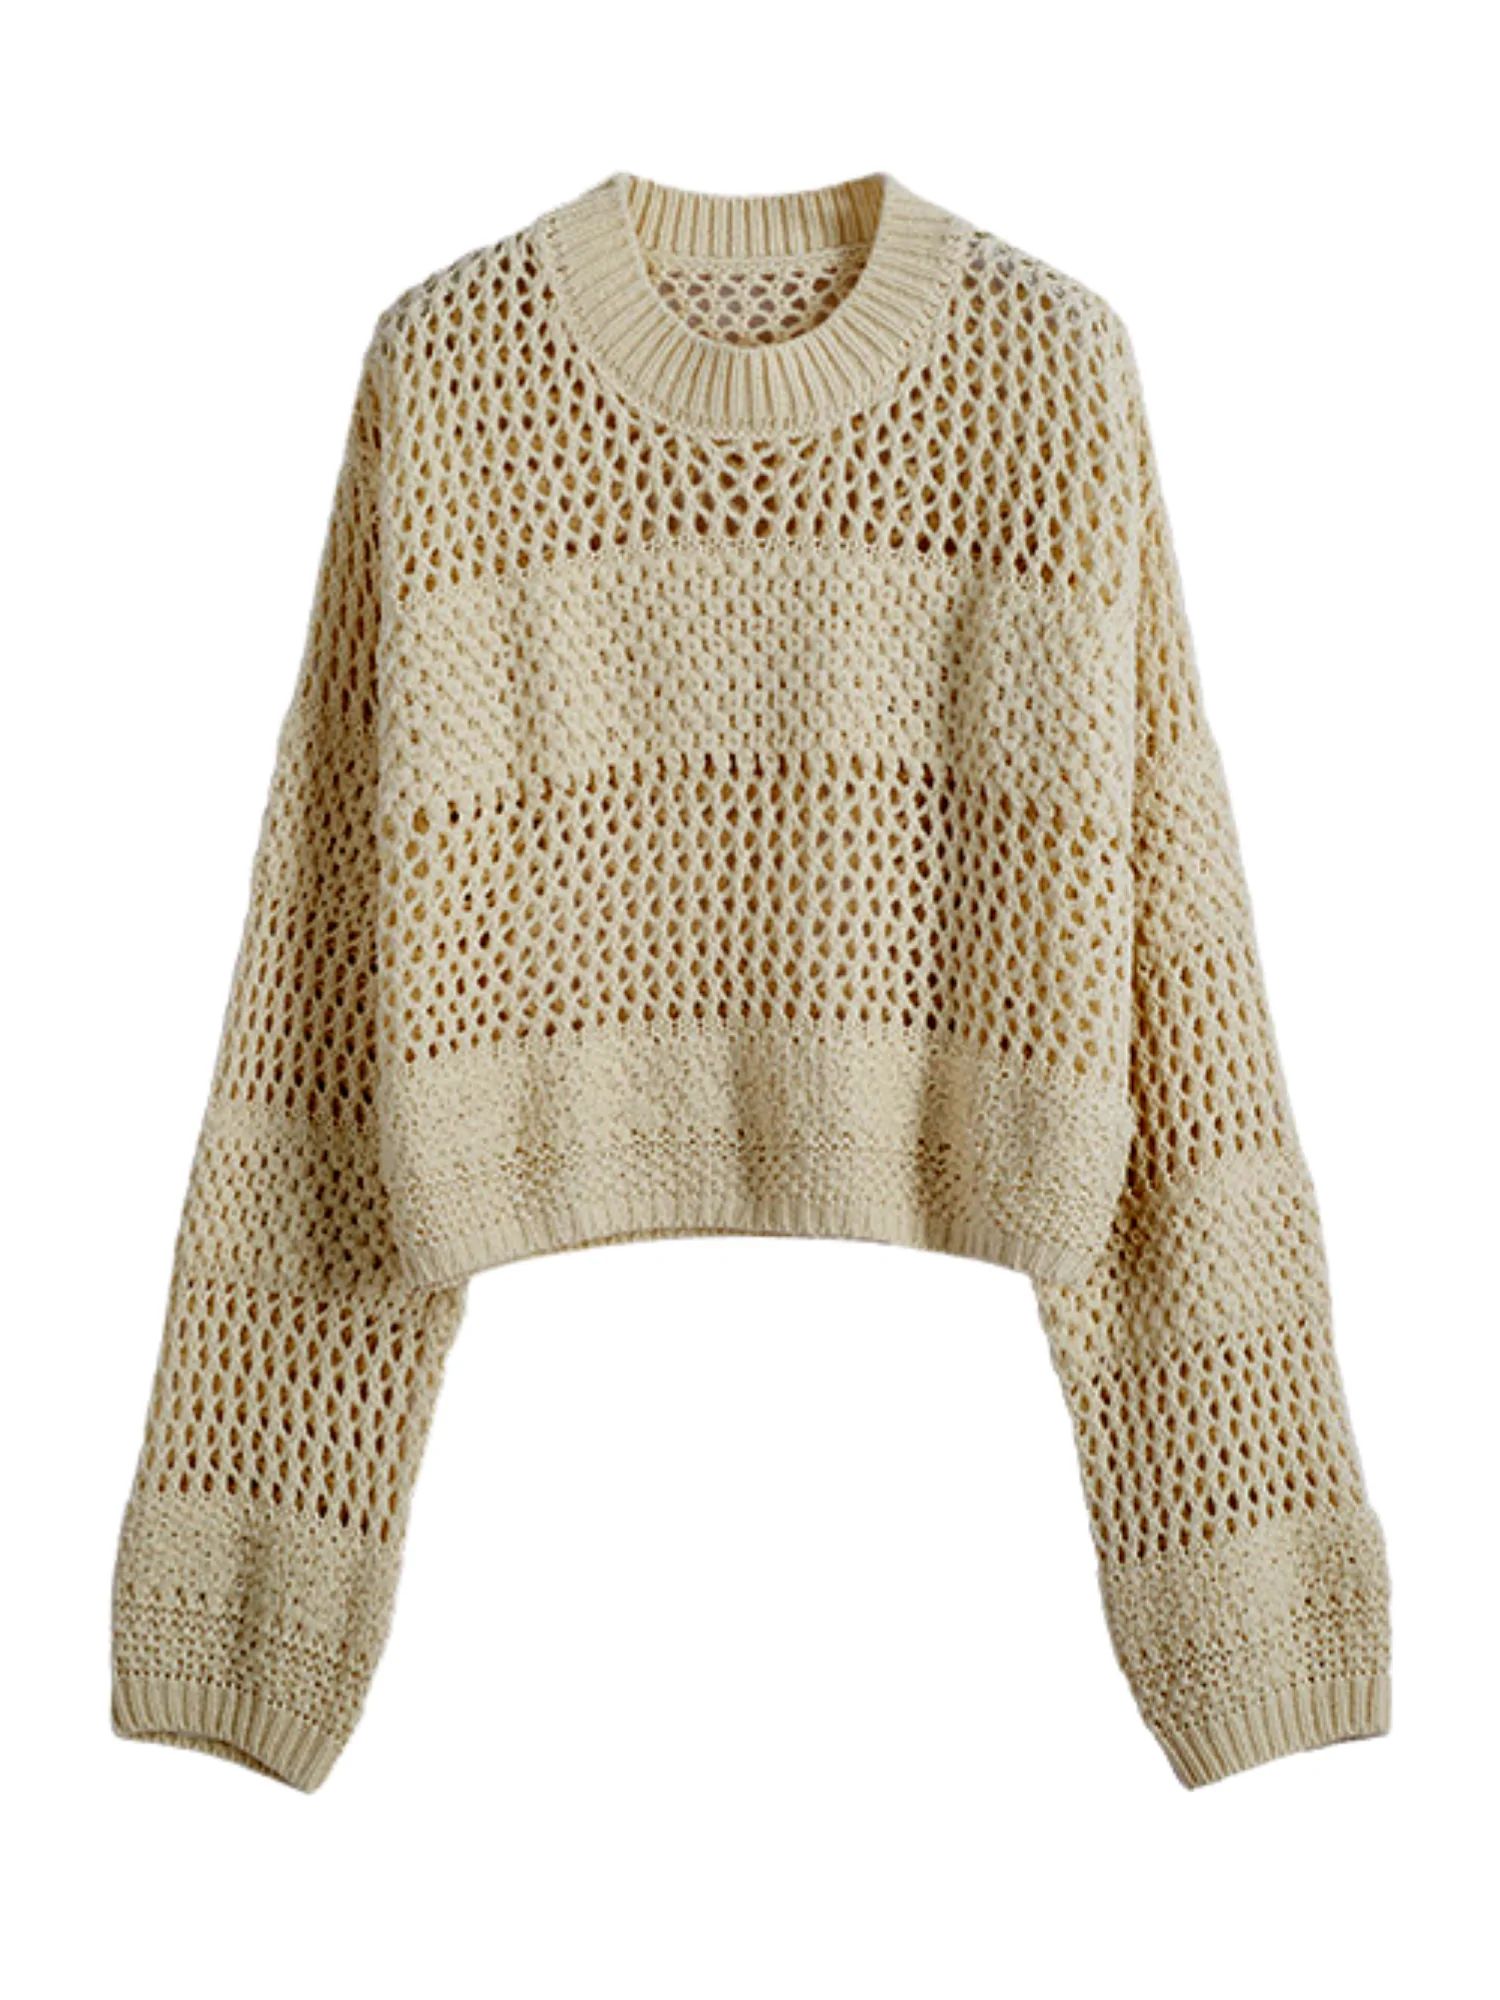 'Johnnie' Crewneck Crochet Knitted Top (3 Colors) | Goodnight Macaroon